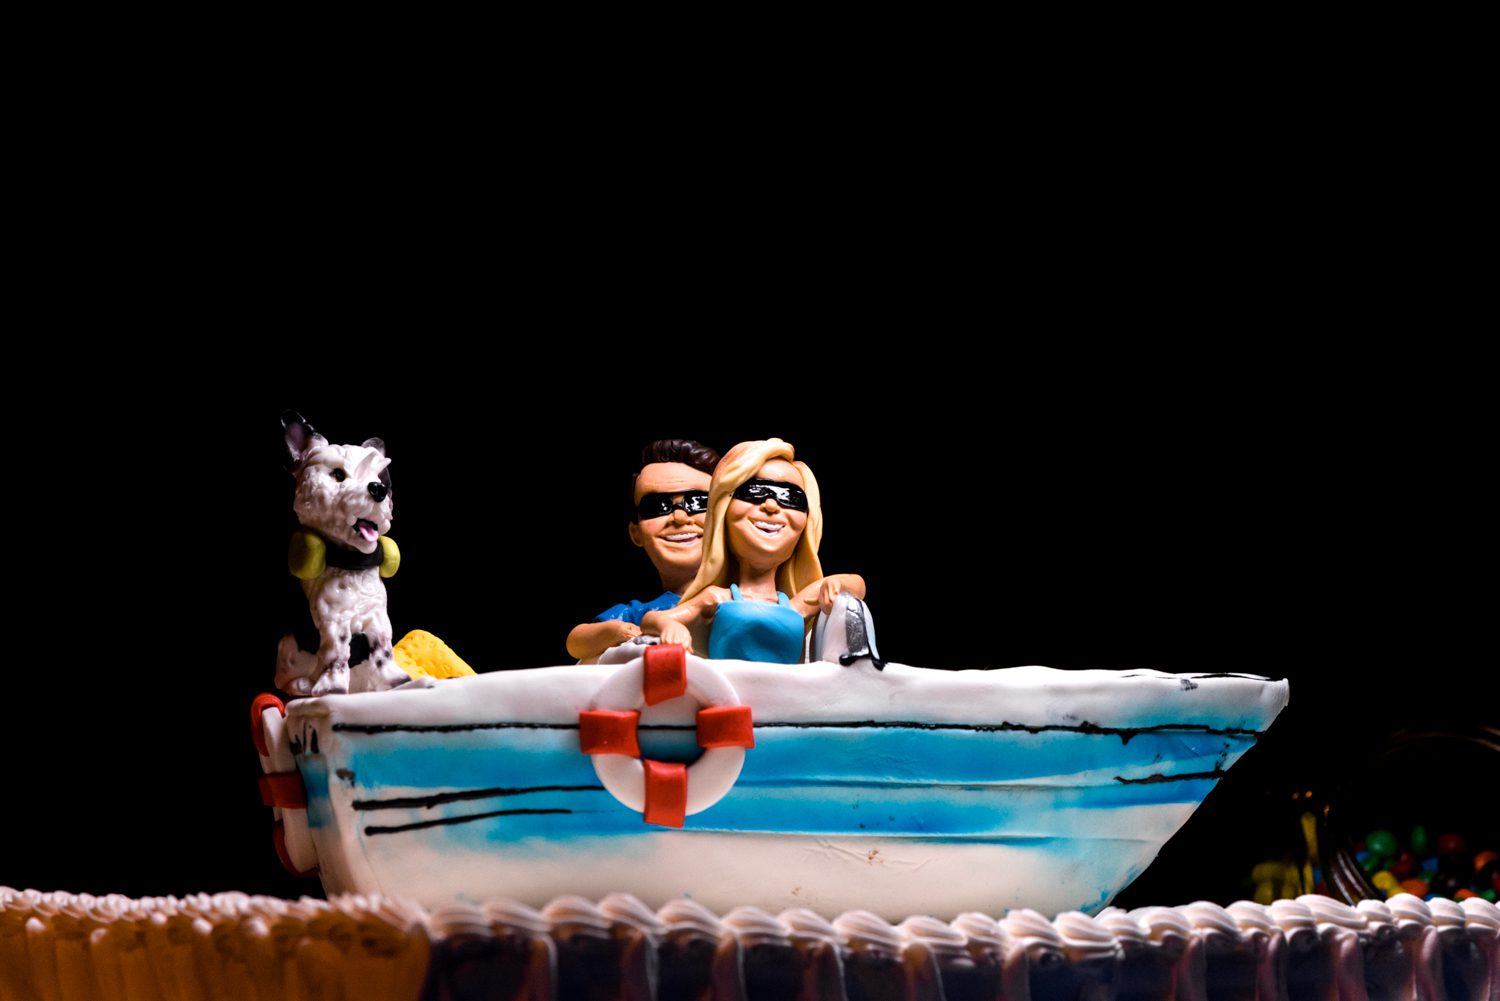 A cake with a couple and a dog in a boat, perfect for Key West garden club weddings.